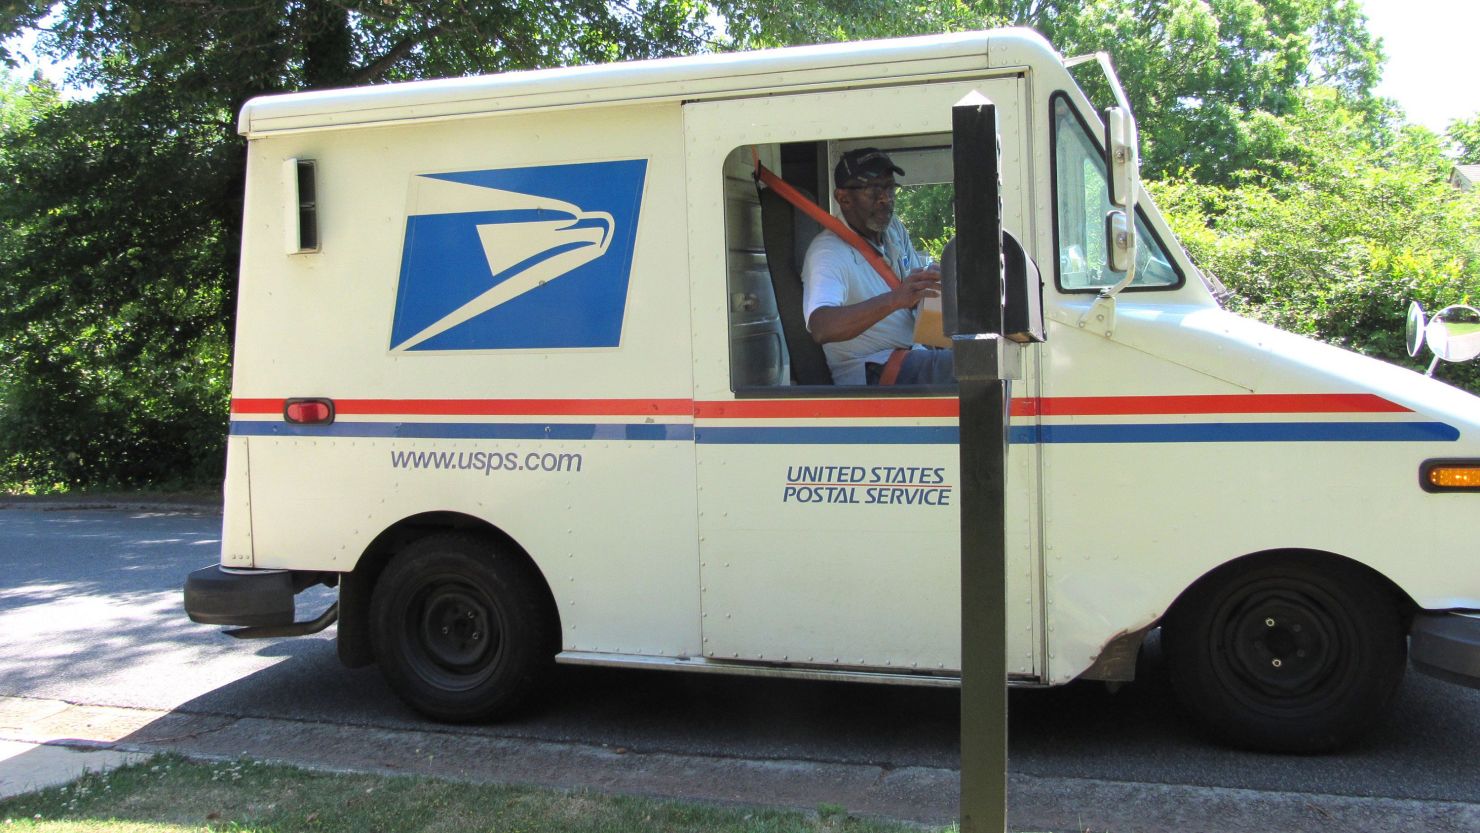 Floyd Martin delivers mail on his last day working for the US Postal Service before retirement.